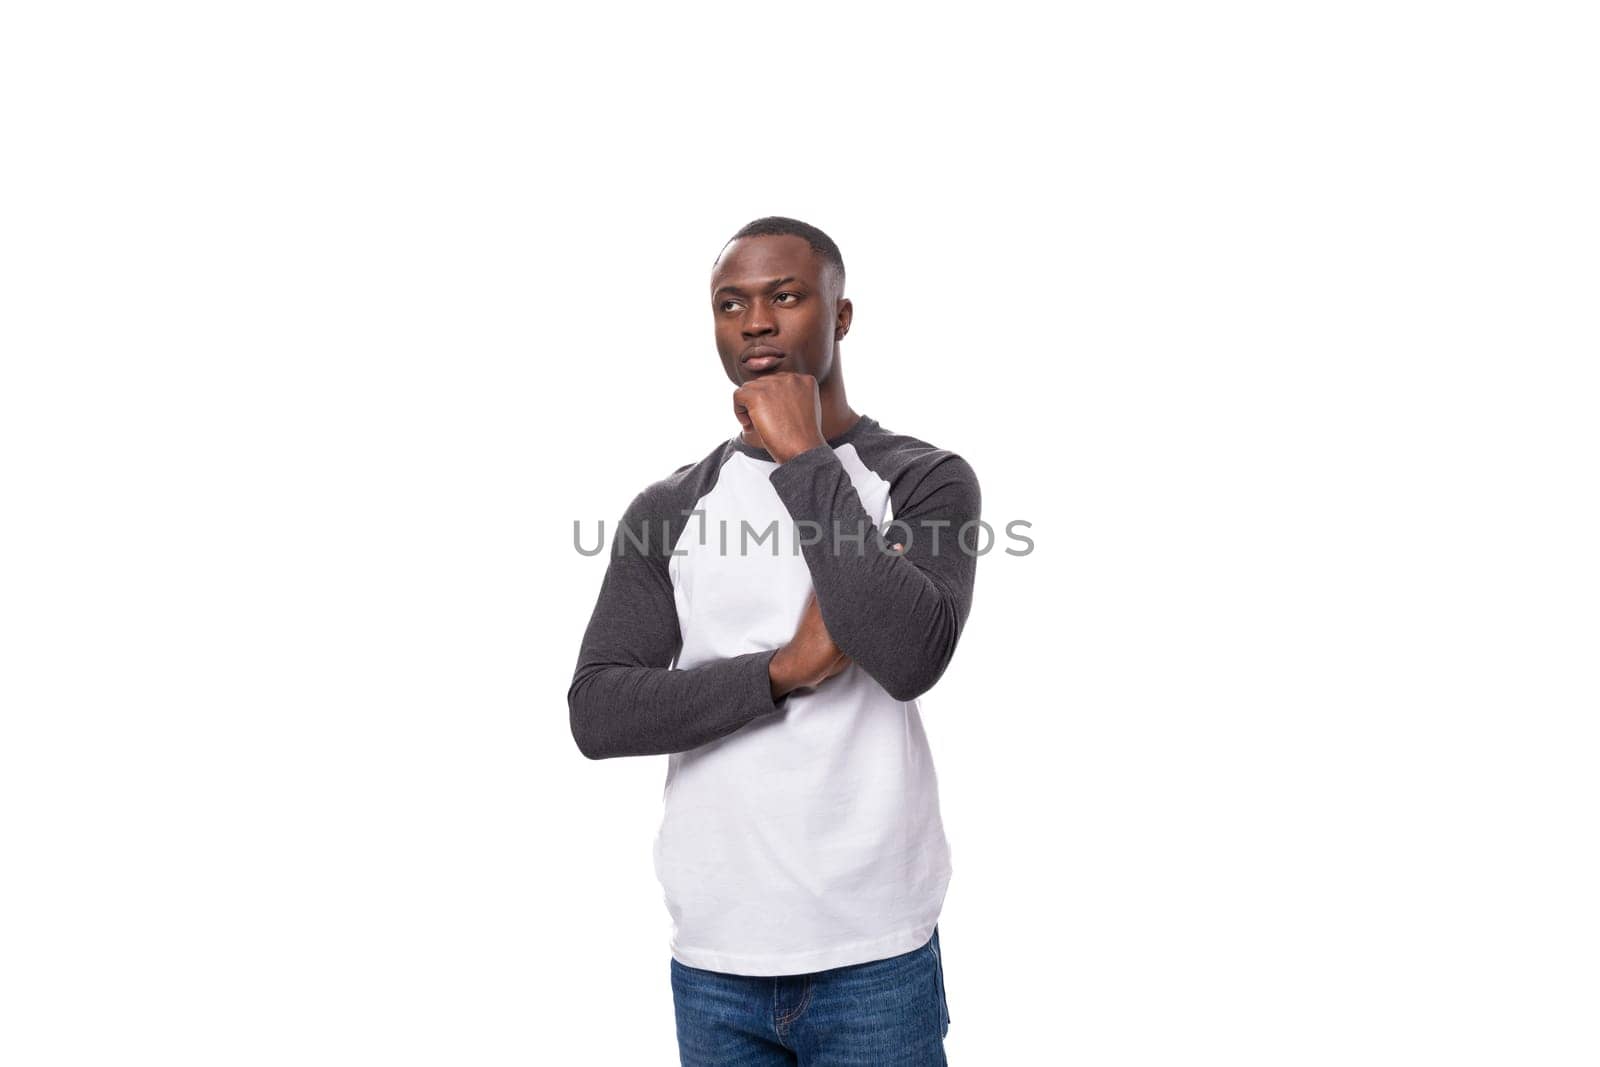 young american man with short haircut stands thoughtfully over isolated white background.